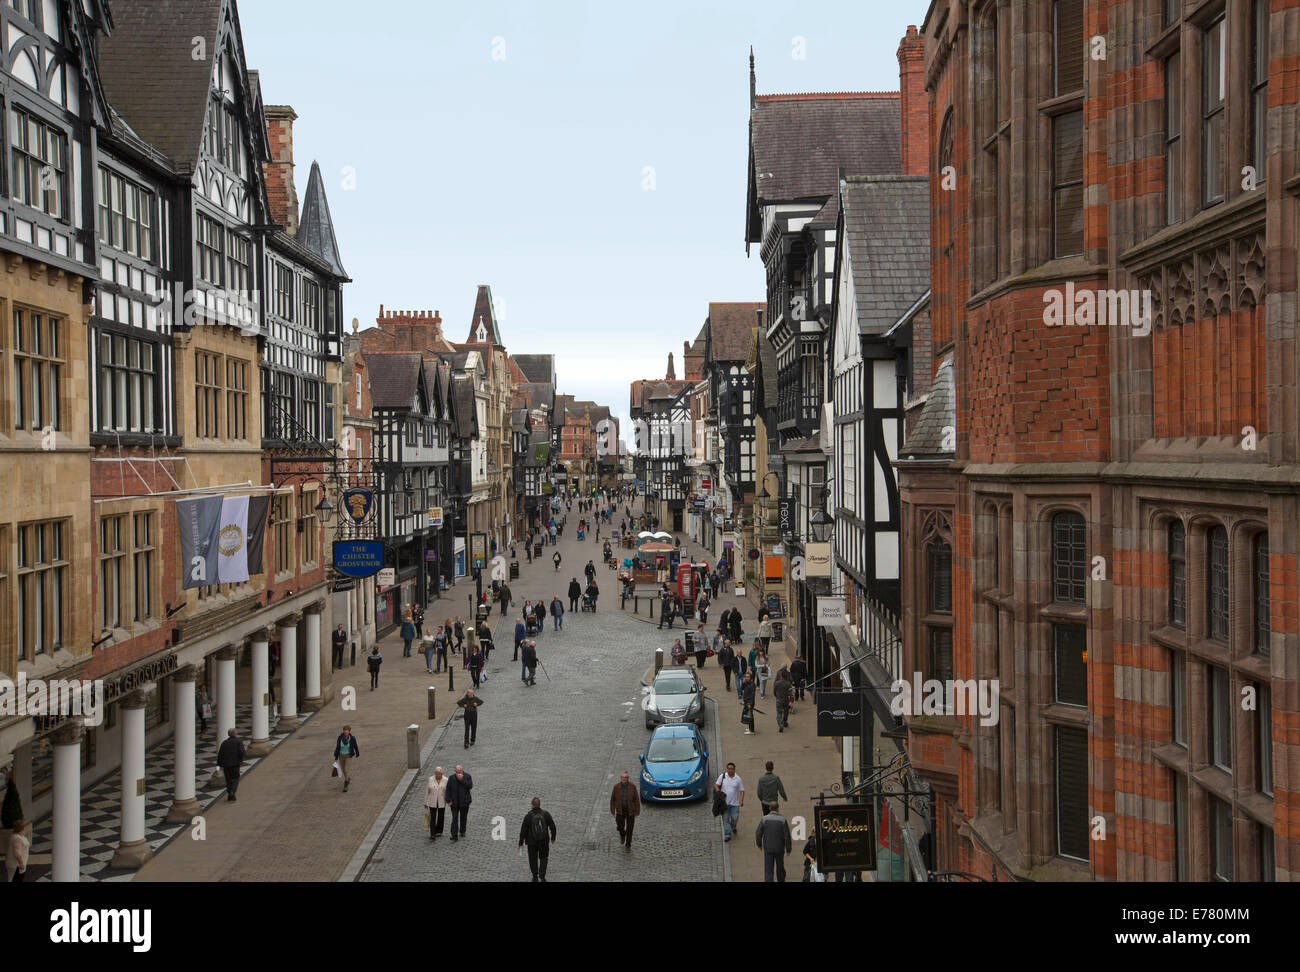 View of extensive pedestrian shopping mall and historic buildings in English city of Chester from Eastgate bridge Stock Photo